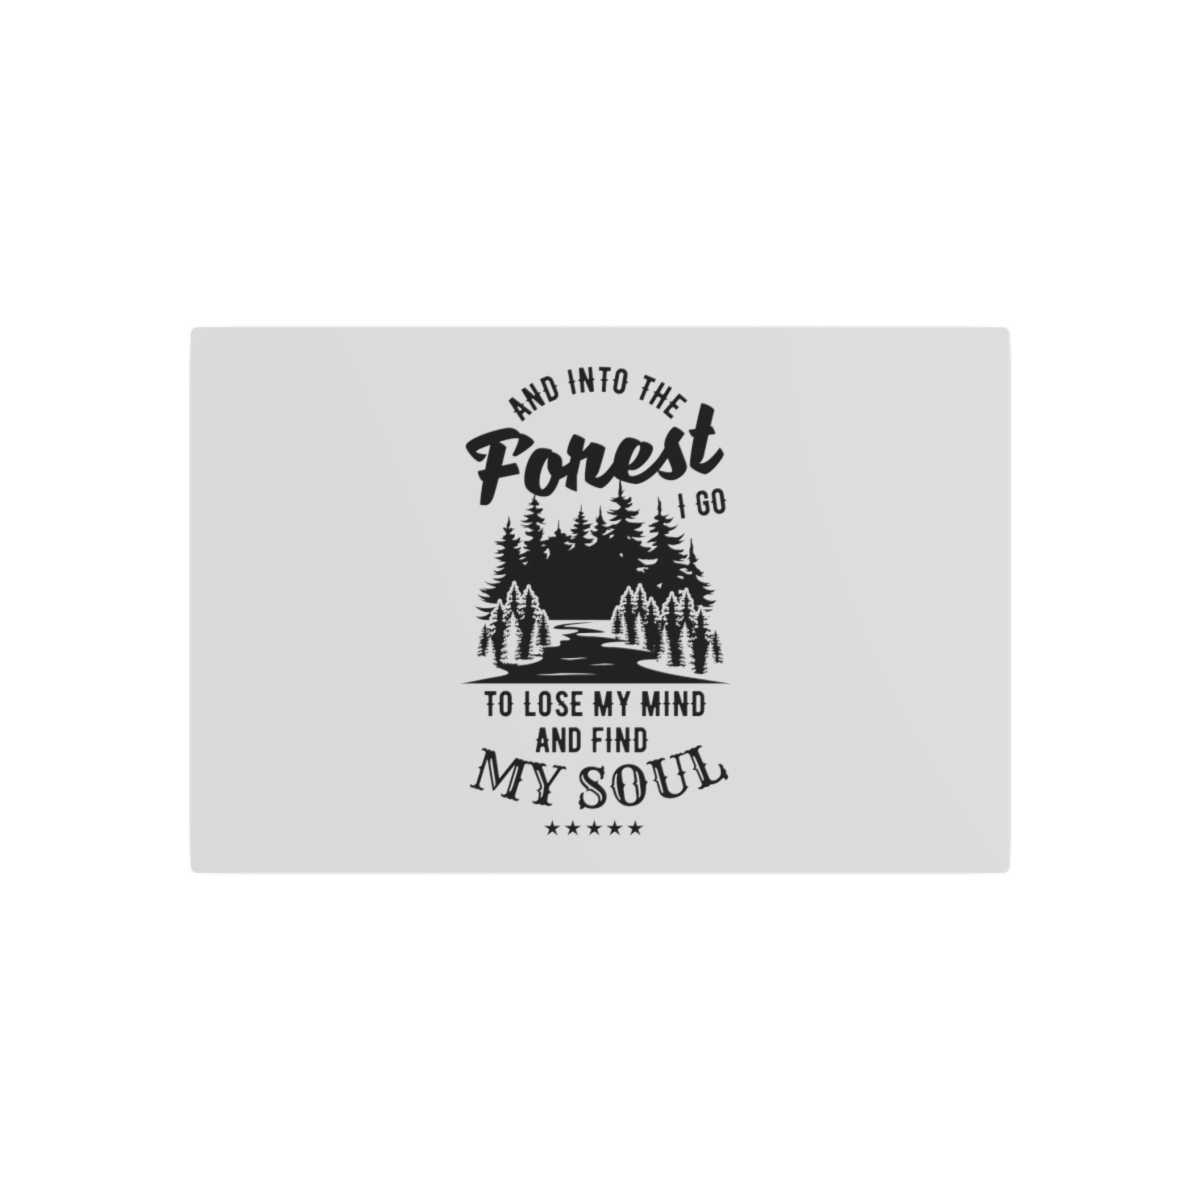 Personalized Metal Art Sign - Inspirational Forest Print - White Aluminum Compos - $43.26 - $107.12